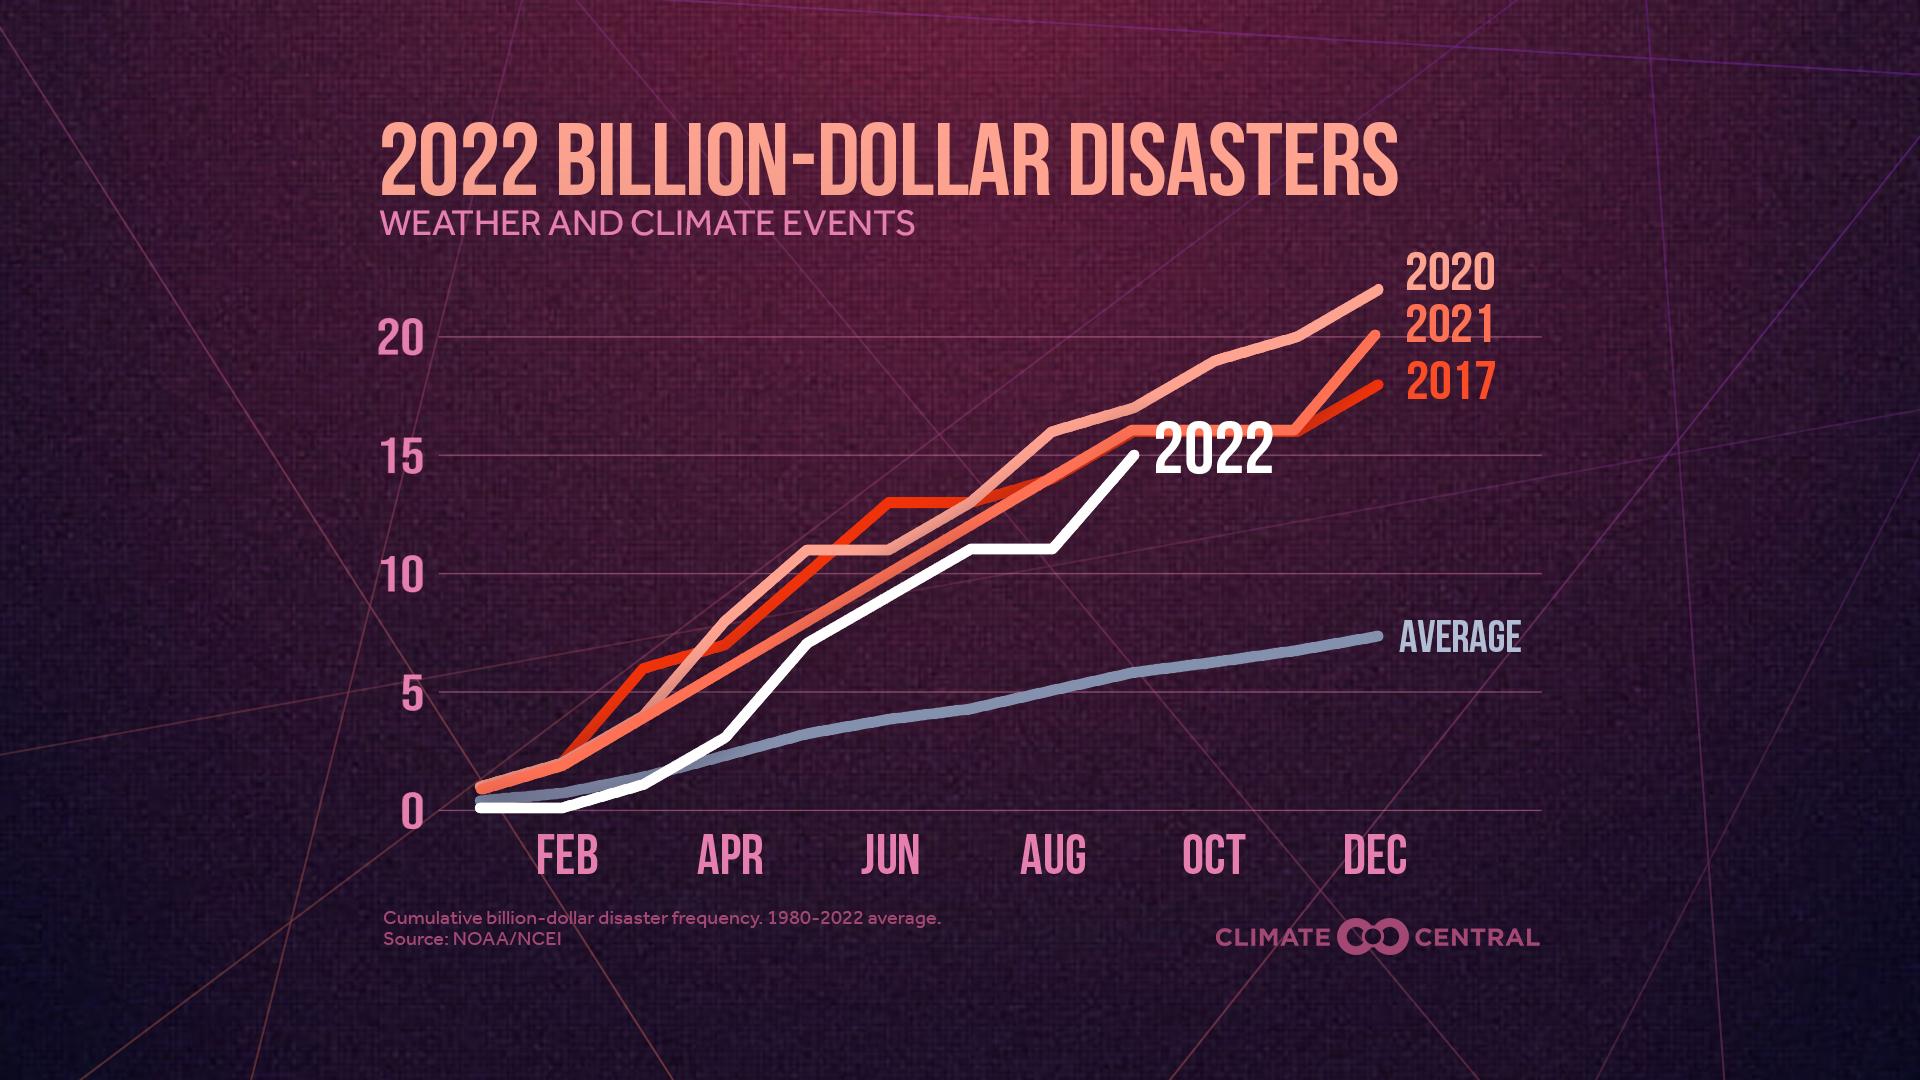 BillionDollar Disasters in 2022 Climate Central